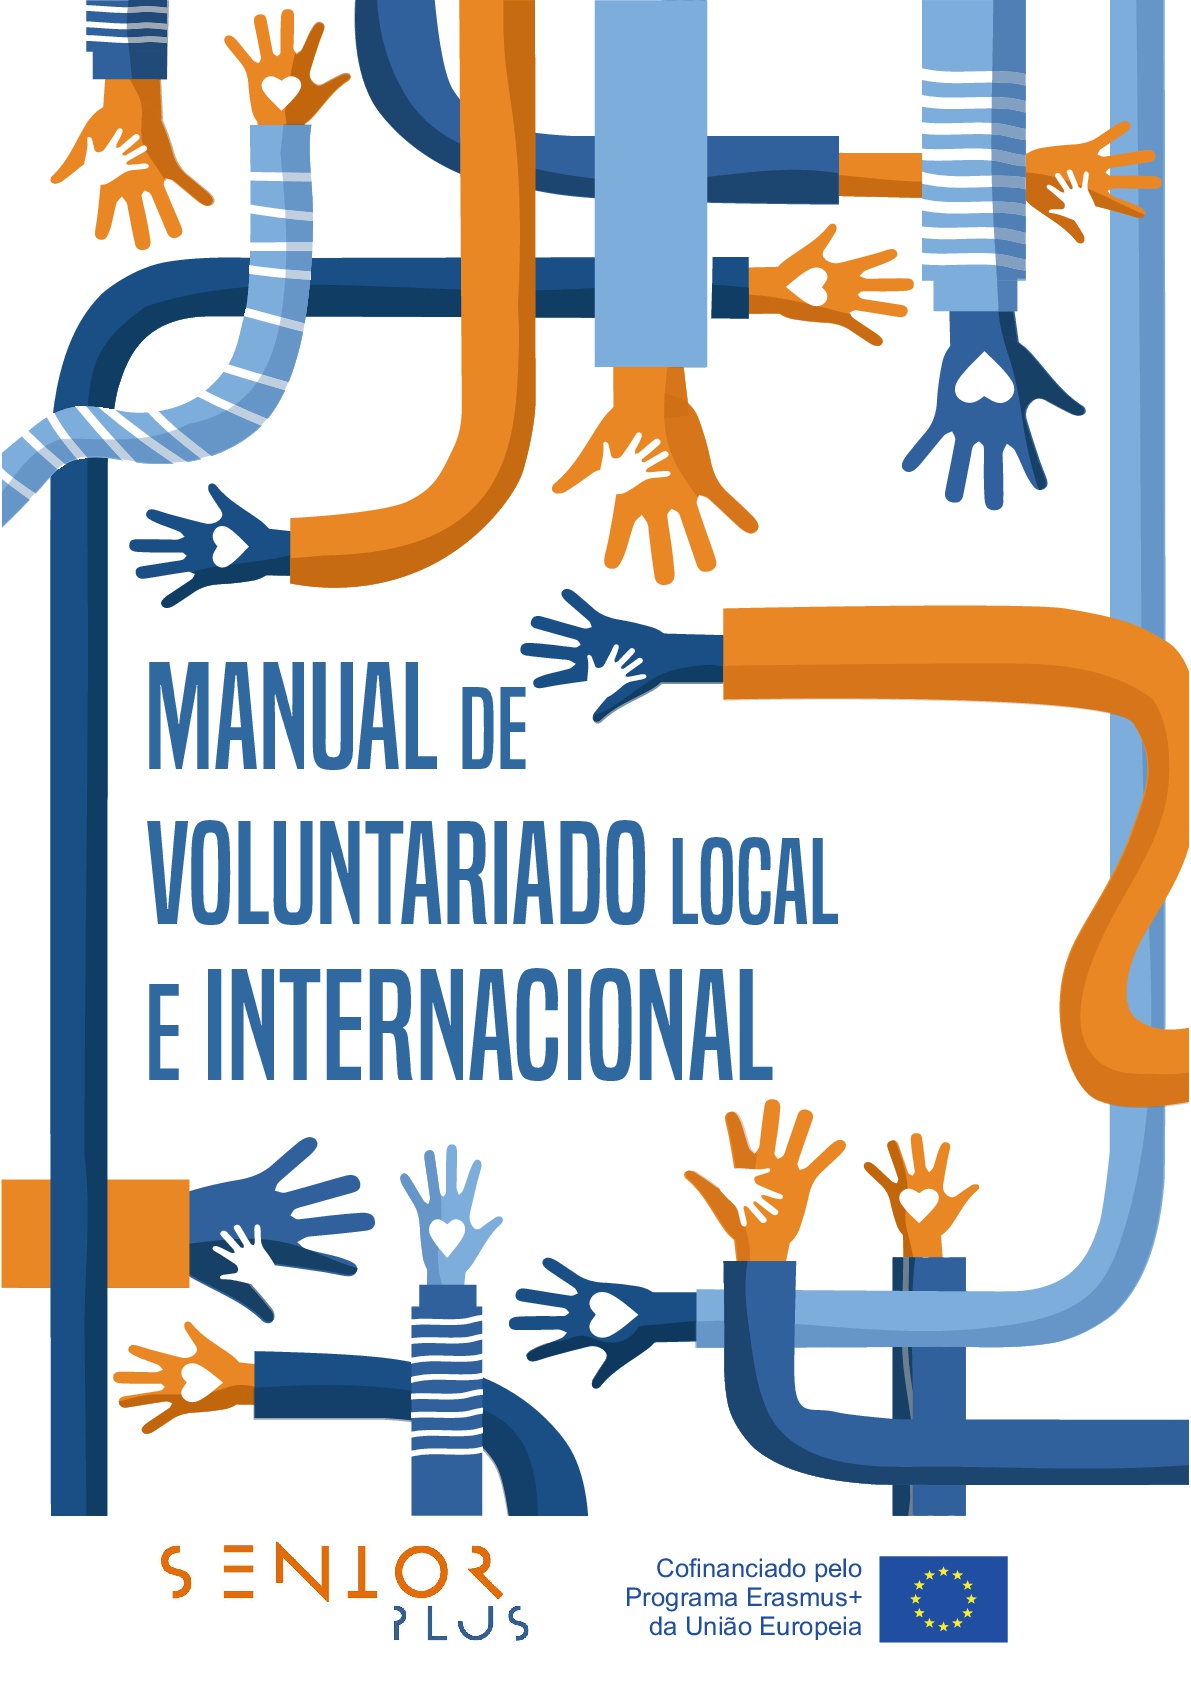 (PT) Guide on International and Local Voluntary Work